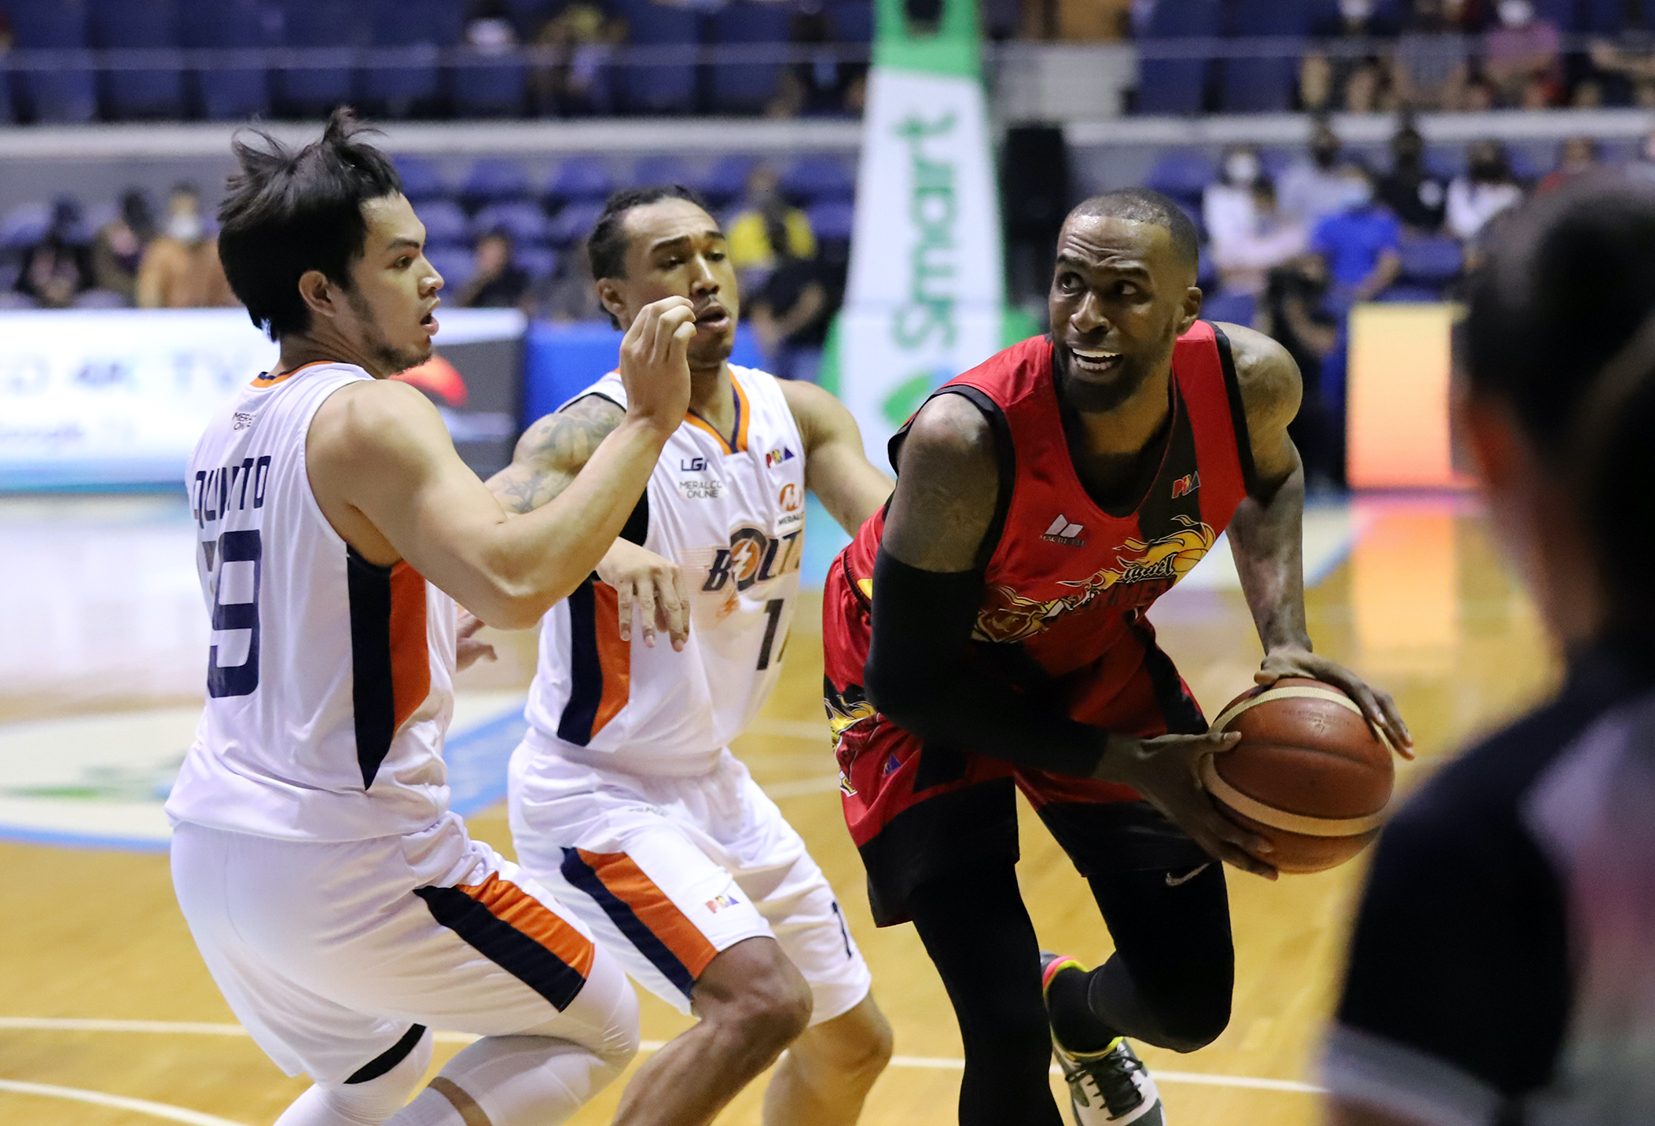 Shabazz to ponder on PBA comeback as brief San Miguel stint ends